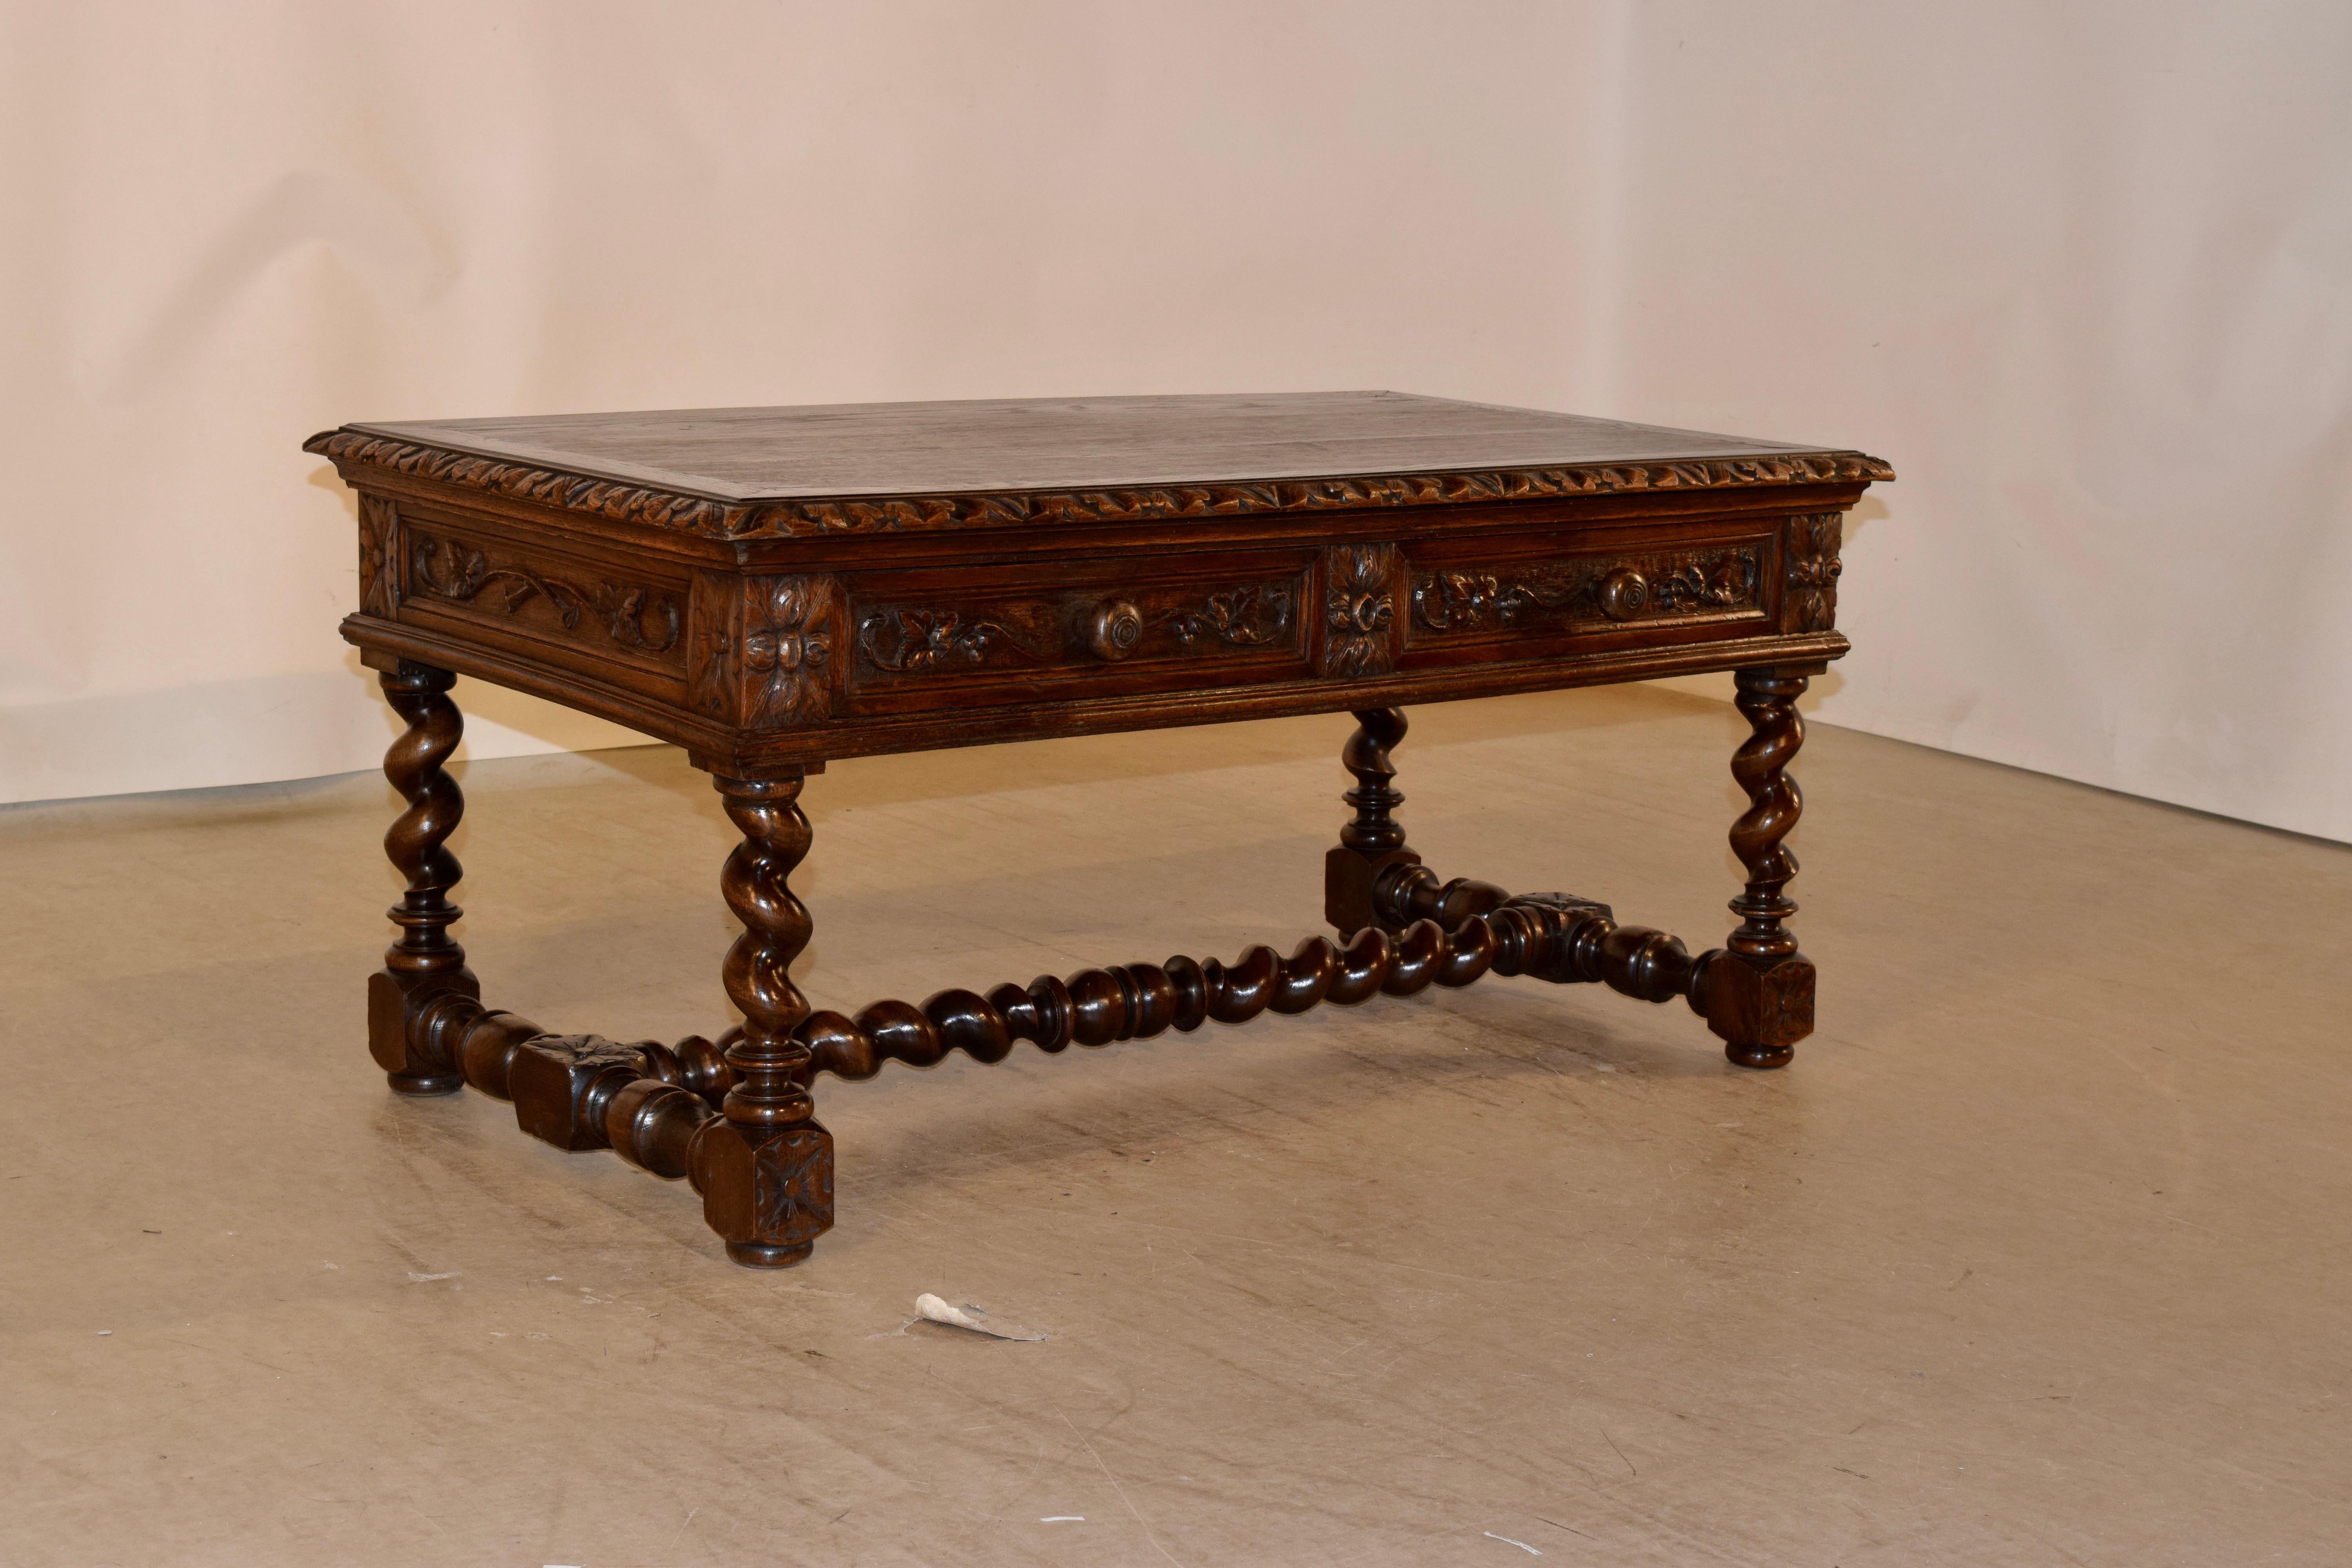 19th century coffee table from France made from oak. The top is banded around the edge and has a beveled and carved decorated edge as well. The apron is paneled and has two drawers with carved decoration in the front, over hand-turned barley twist